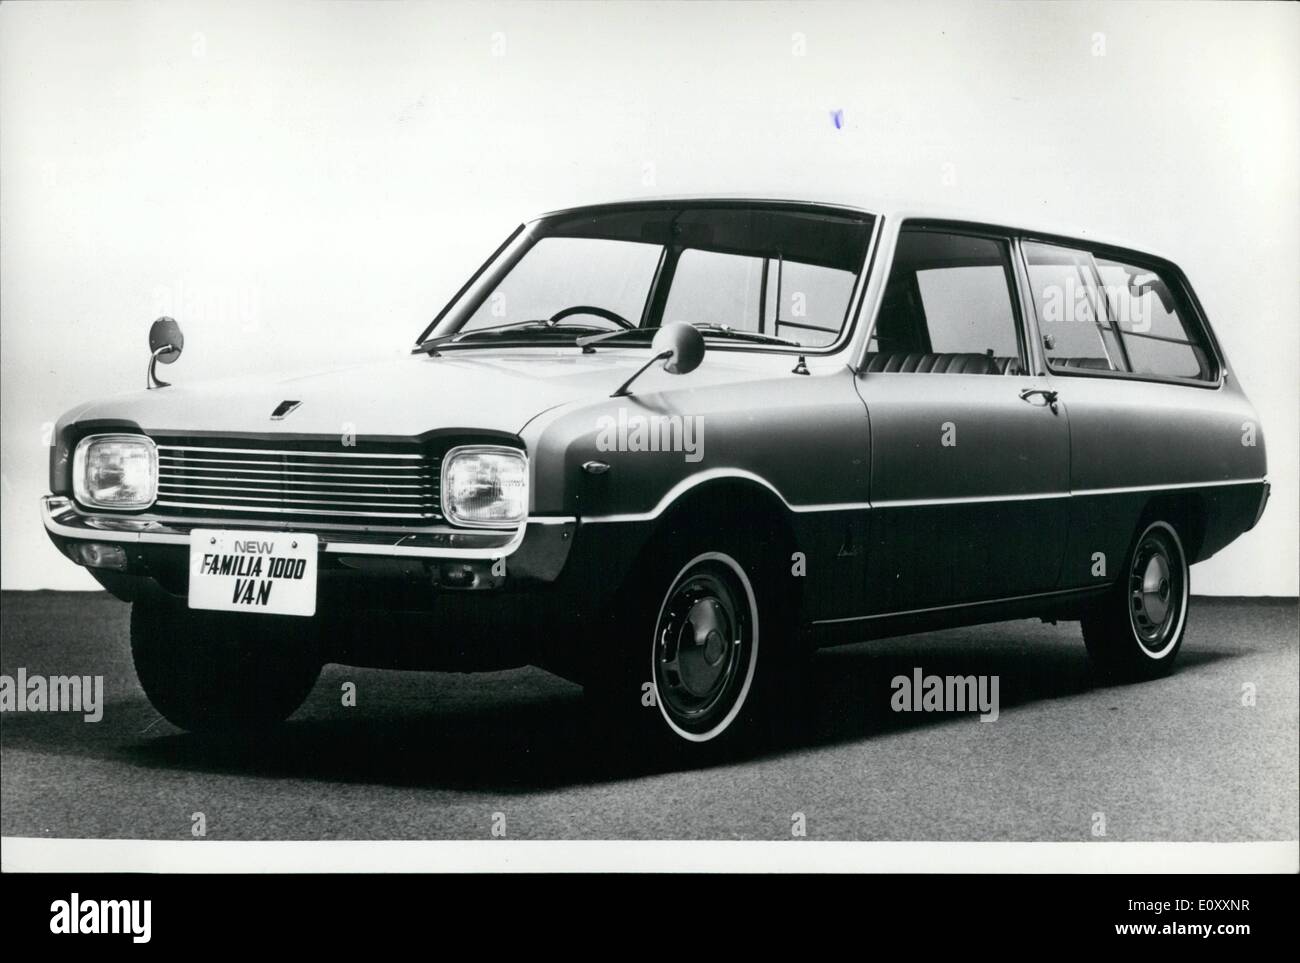 Jan. 01, 1968 - Matsuda's new Familia 1000 Van. Toyo Kogyo Co. unreveals  their latest model, New Familia 1000 Van, in 3.70m length, 1.48m width, and  1.405m height. The 987cc, 2-seater van